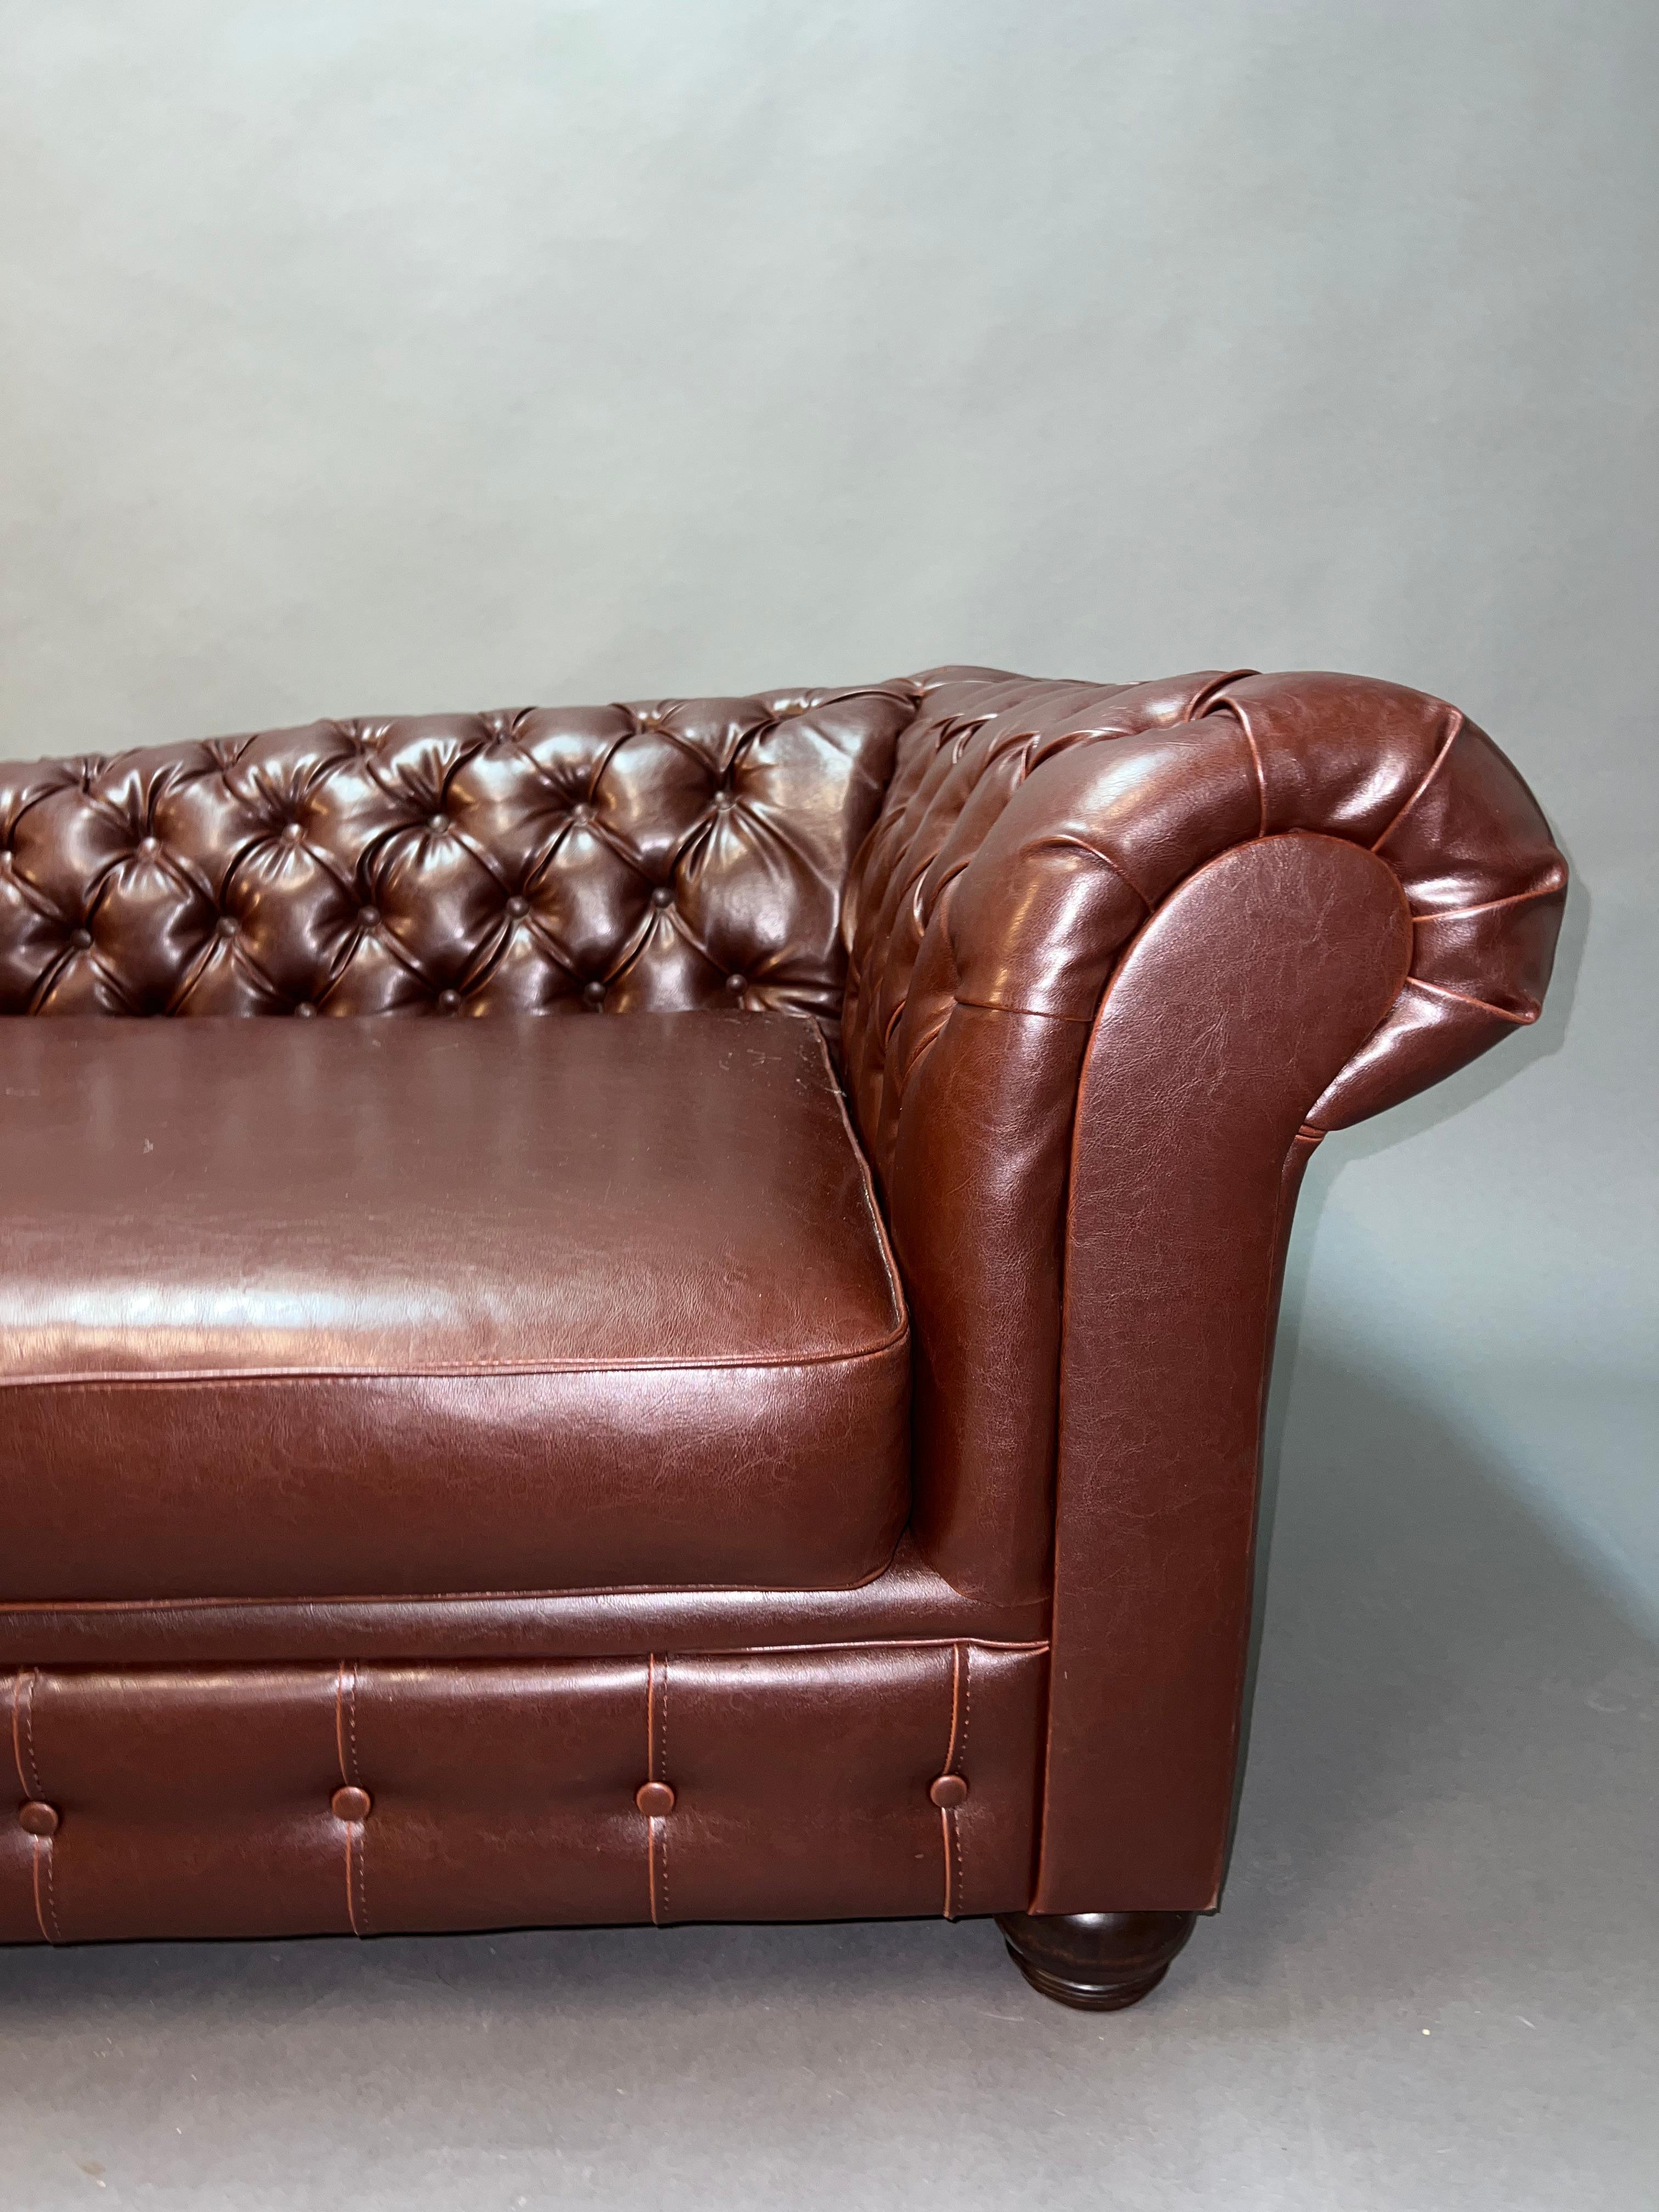 English Lovely Vintage Chesterfield Brown Leather Look Chaise Lounge Daybed Sofa For Sale